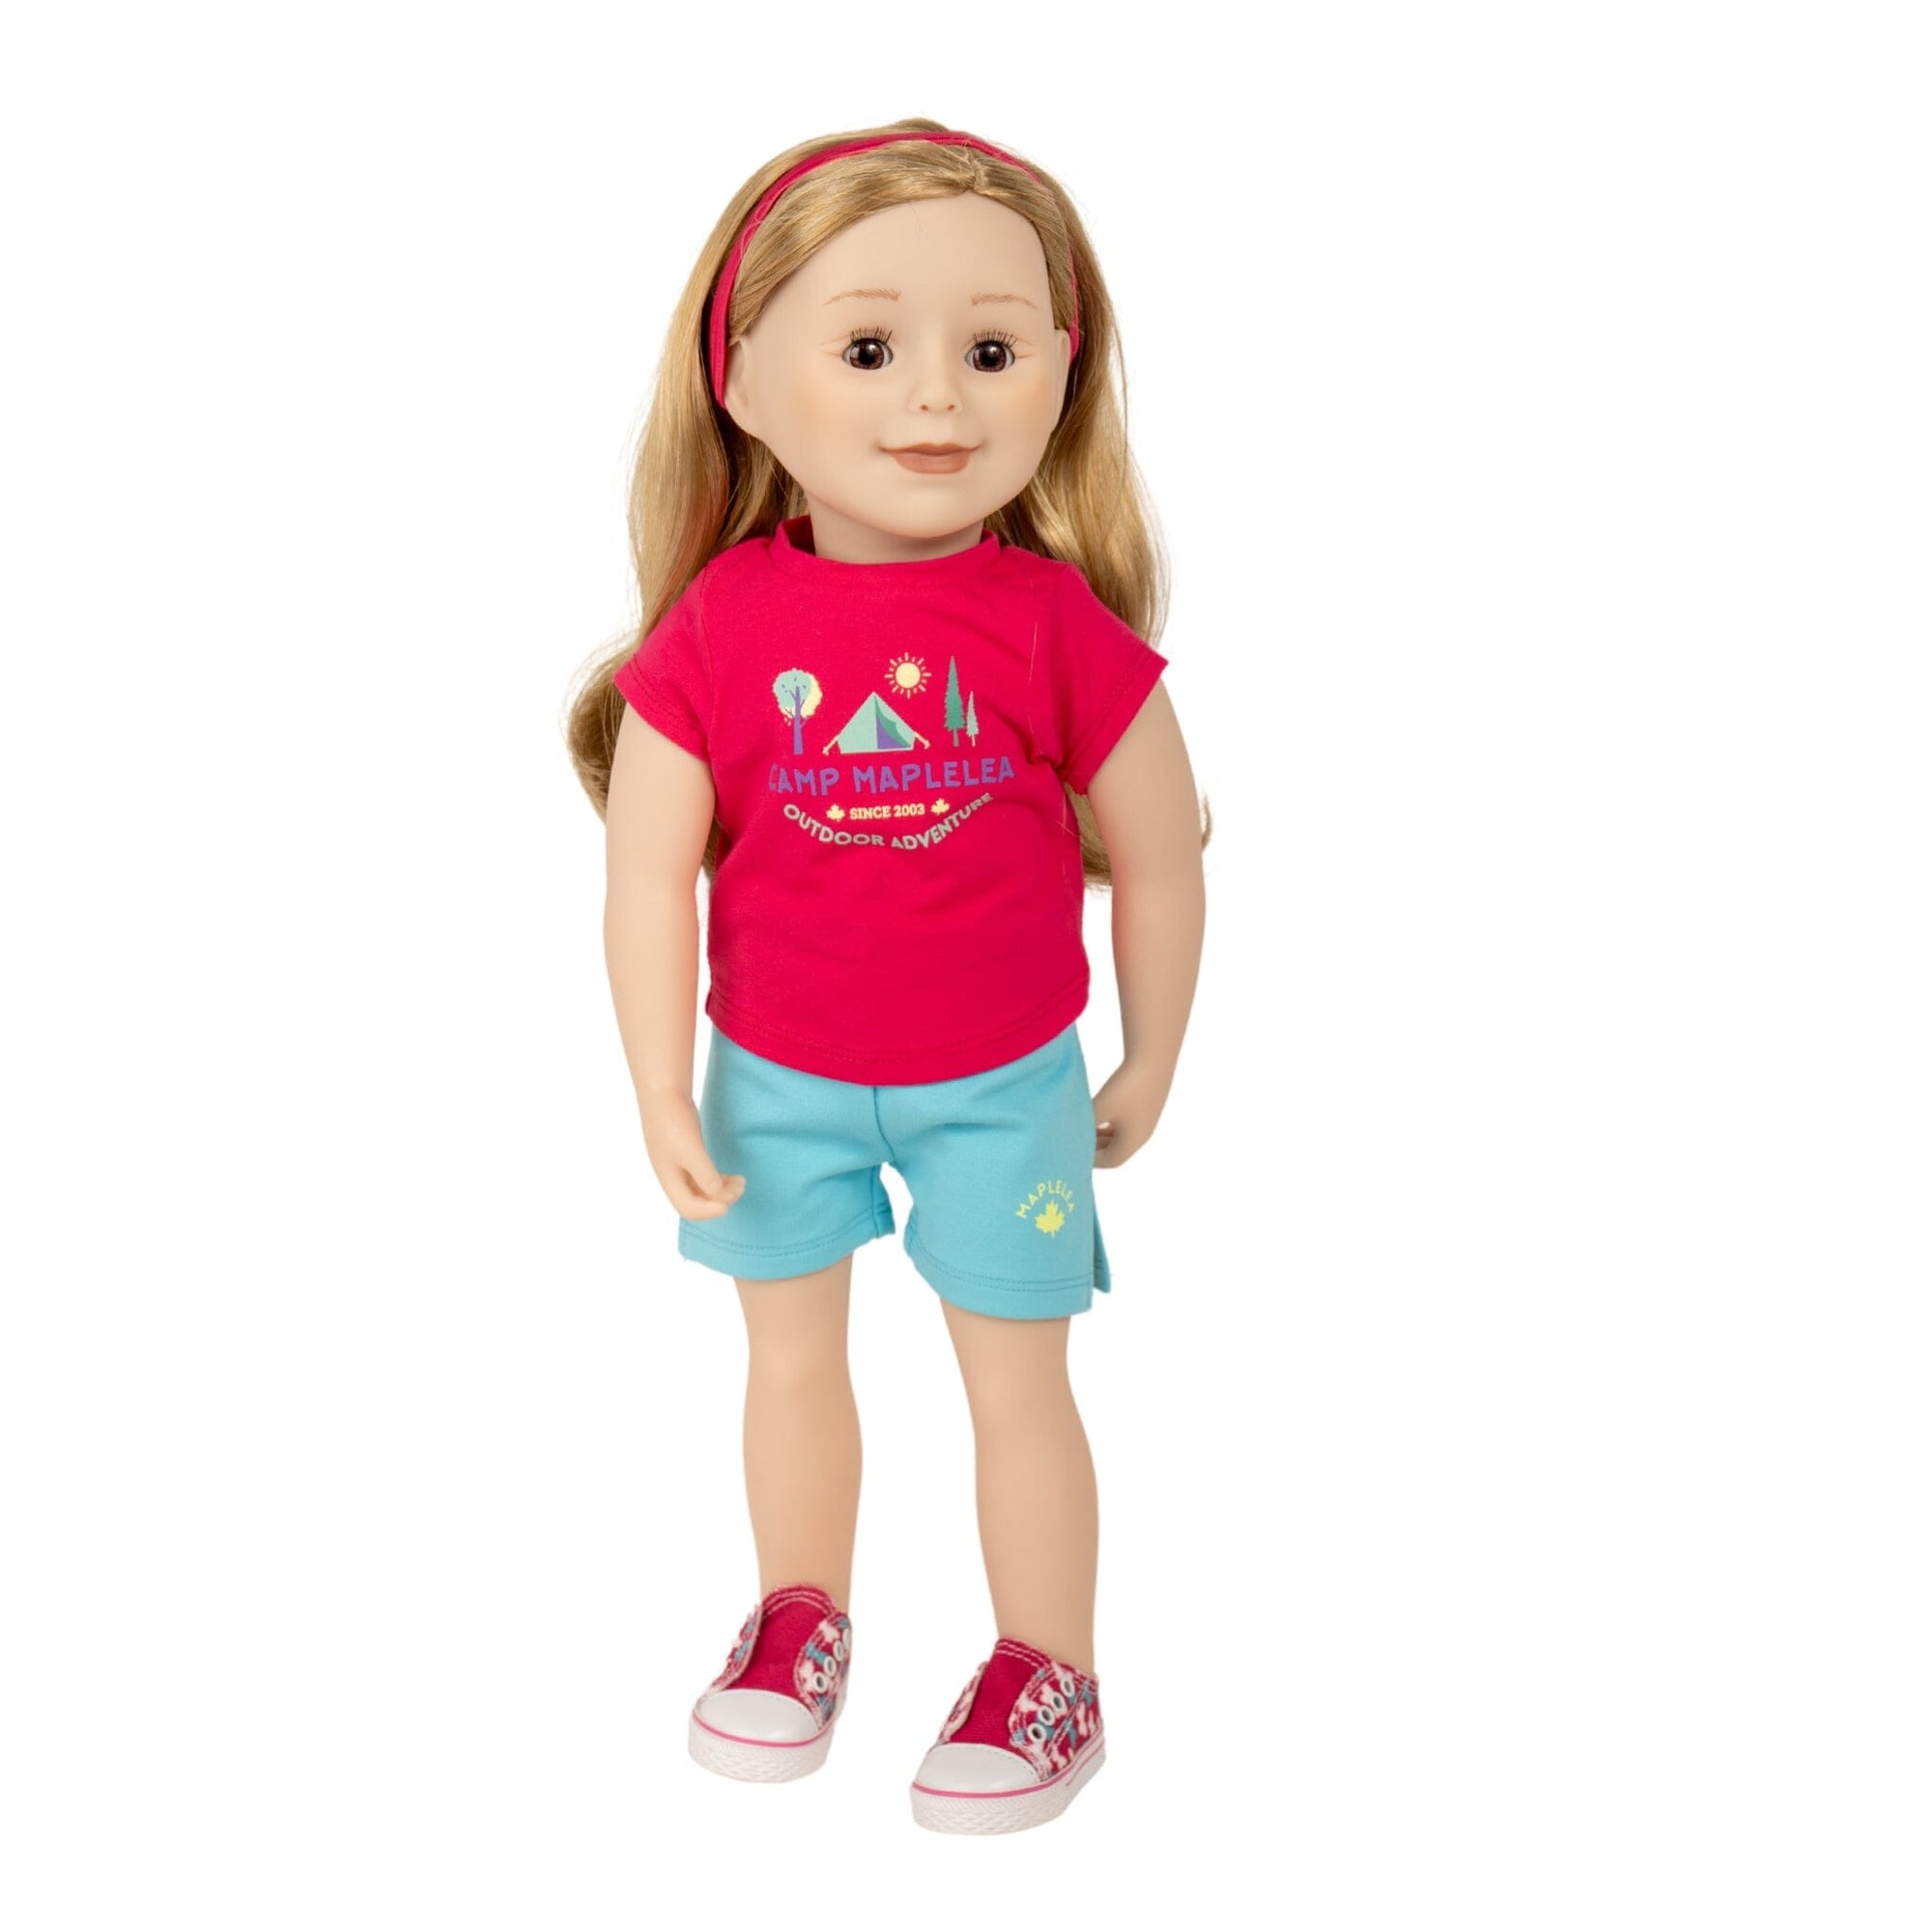 18" doll Maplelea doll wearing camp outfit with headband t-shirt and shorts with butterfly runners